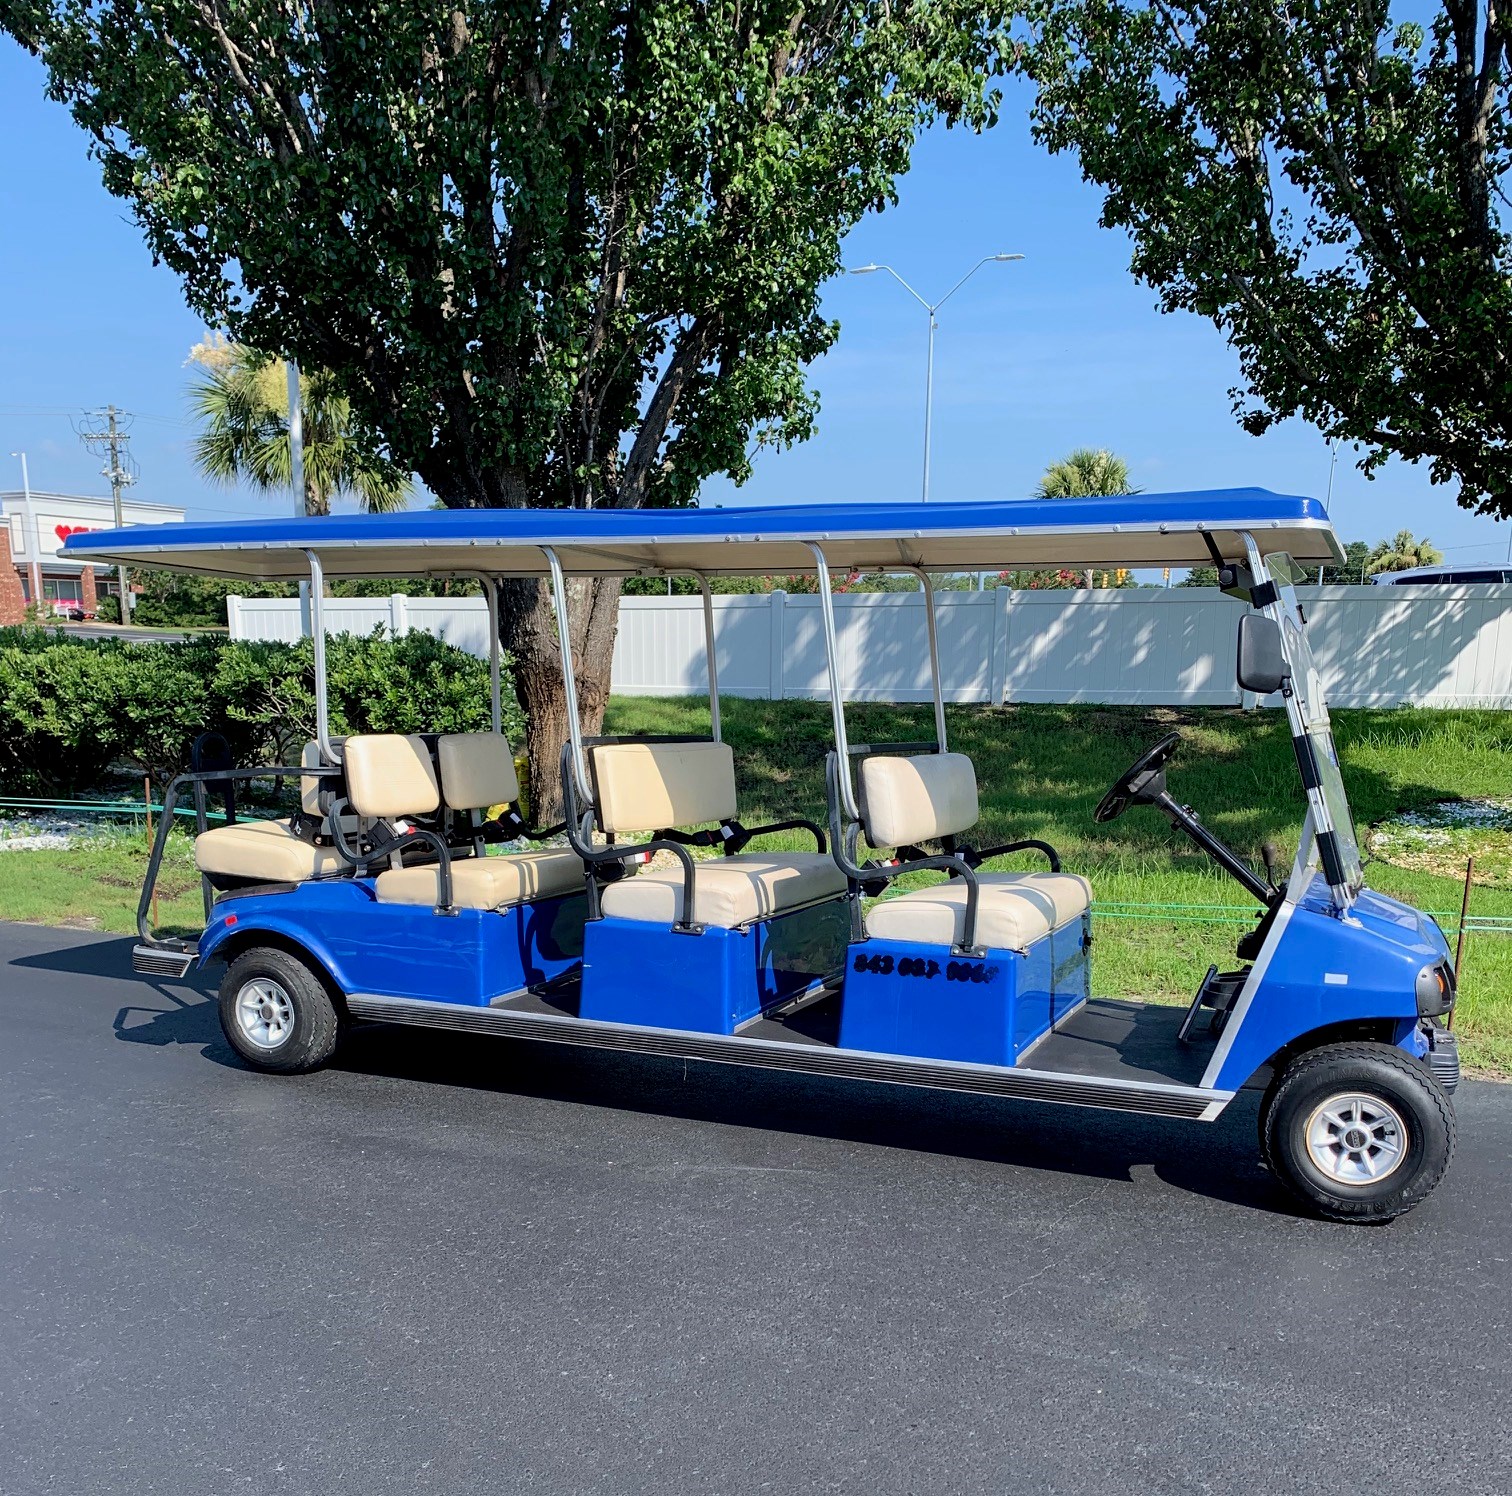 LIMITED TIME ONLY! 2003 CLUB CAR DS 8 PASSENGER GAS CART 